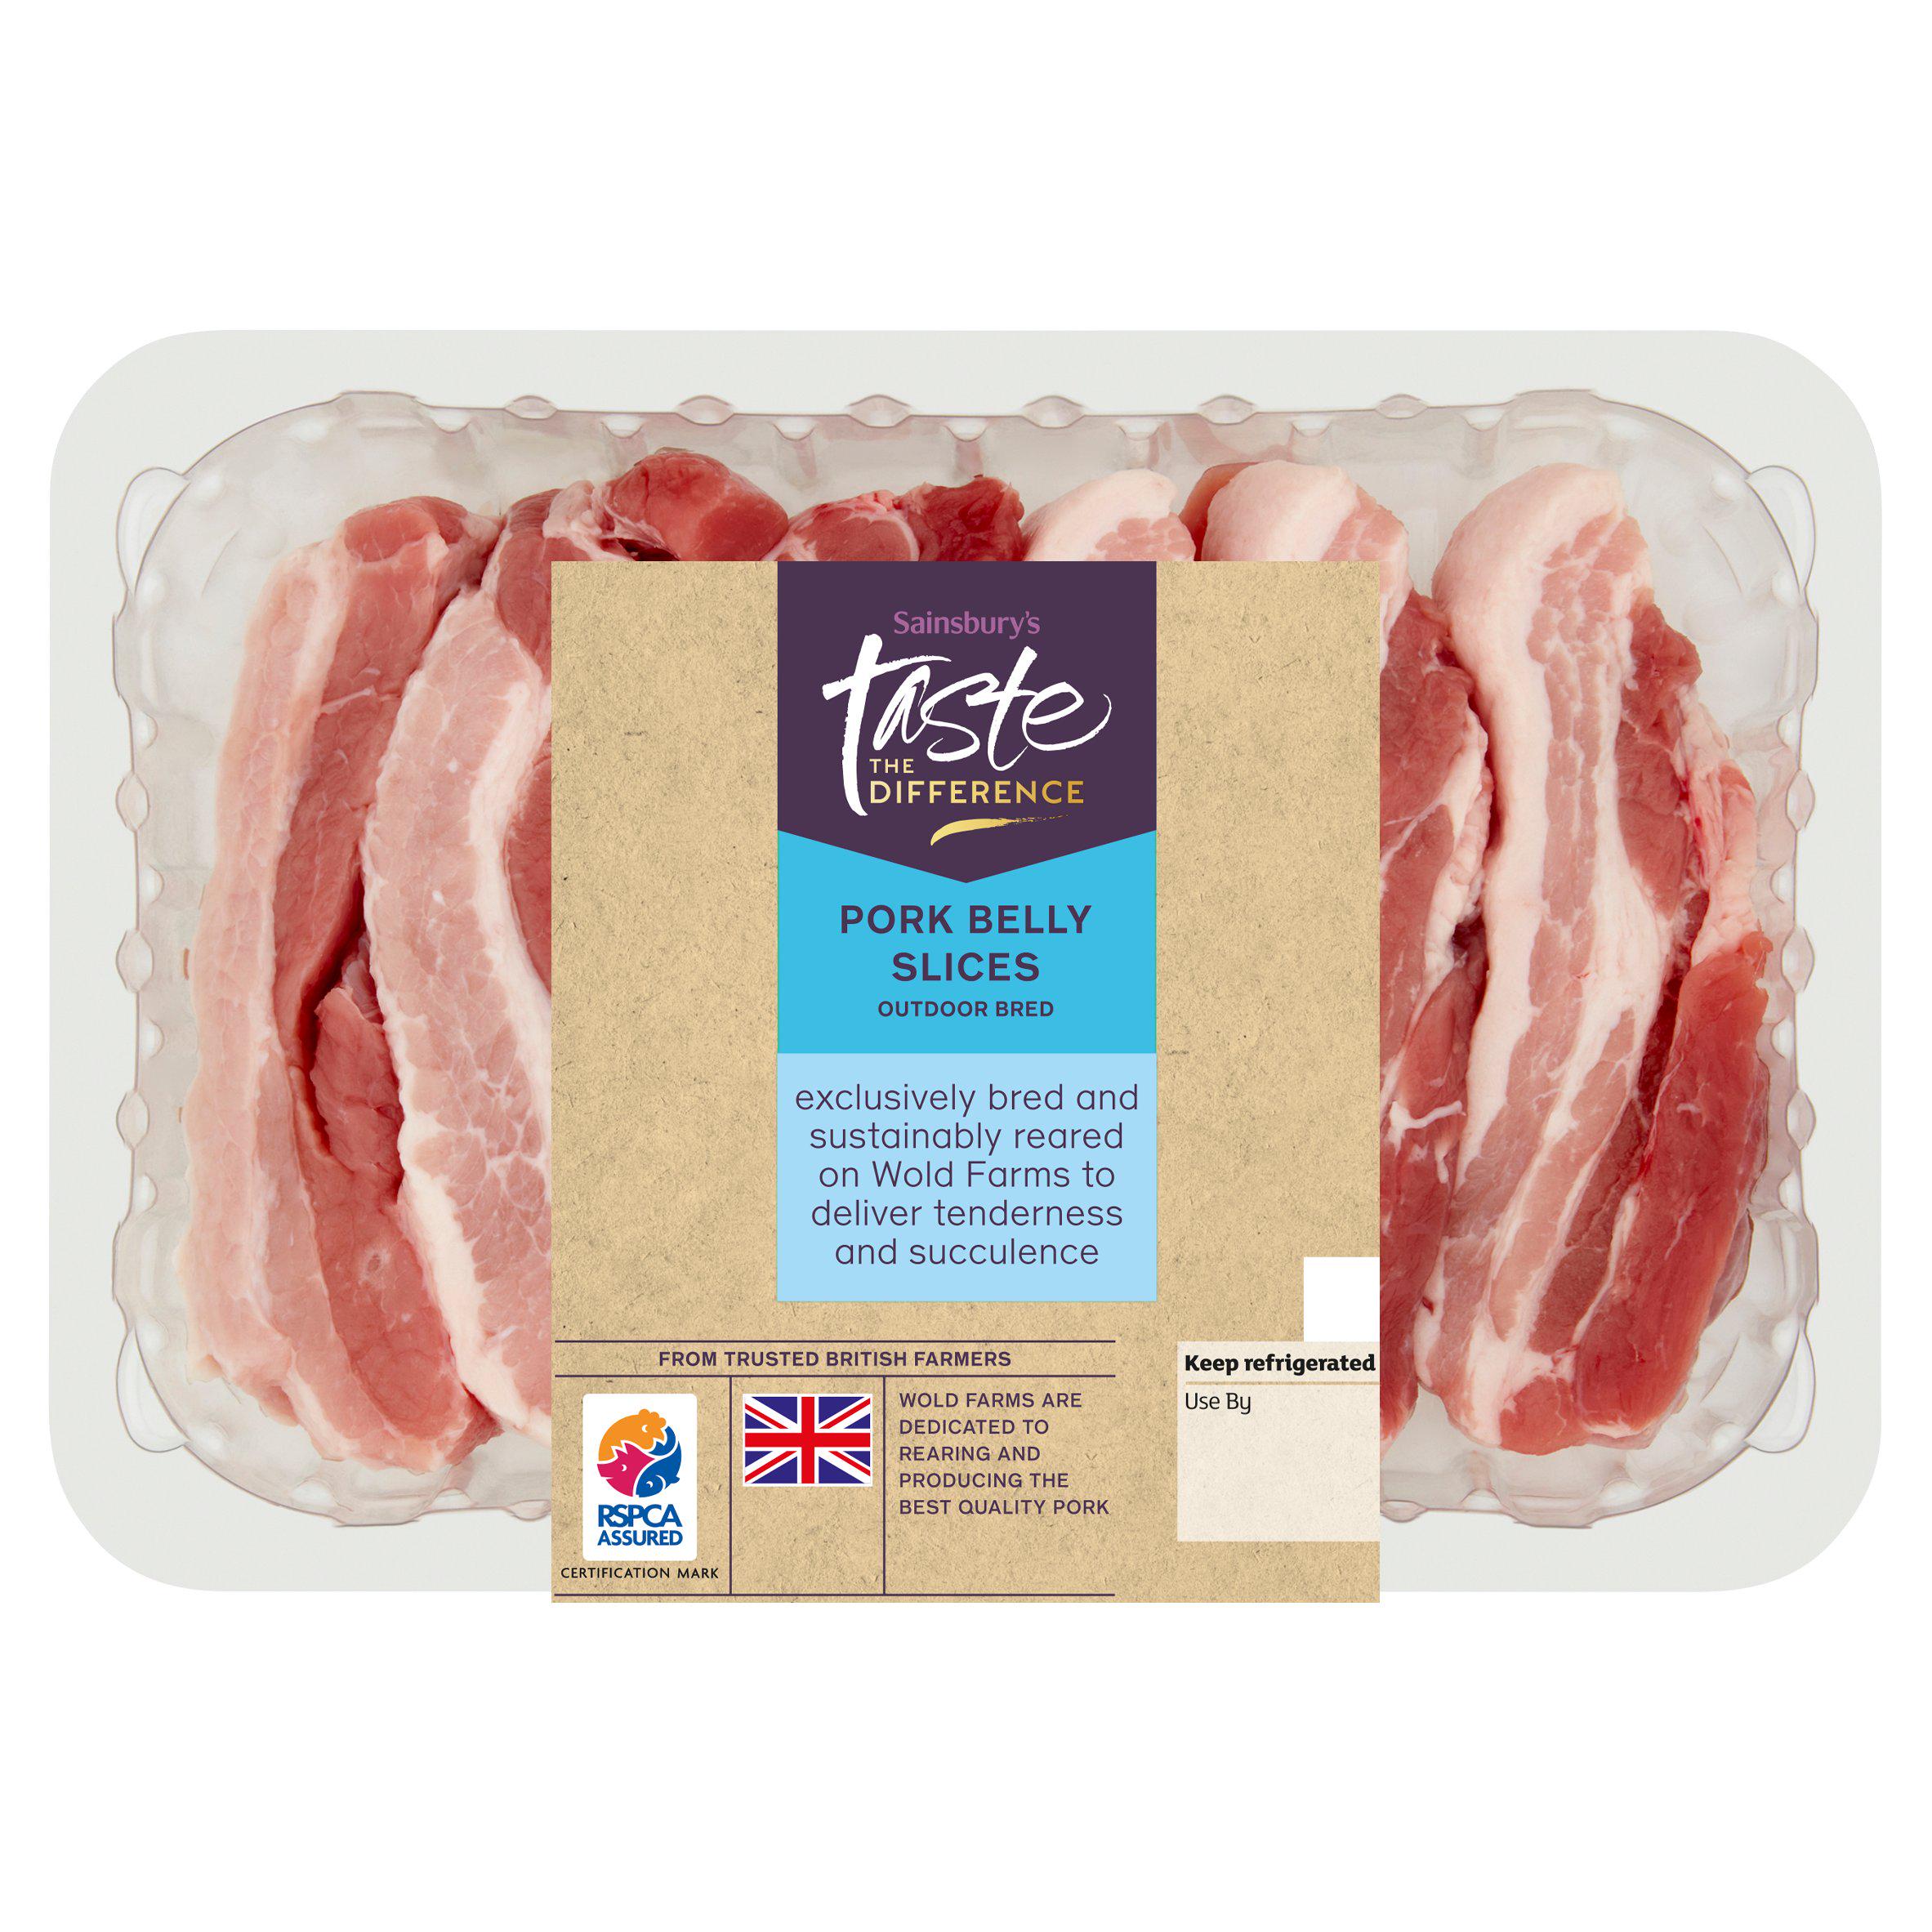 Sainsbury's Outdoor Bred British Pork Belly Slices, Taste the Difference 500g